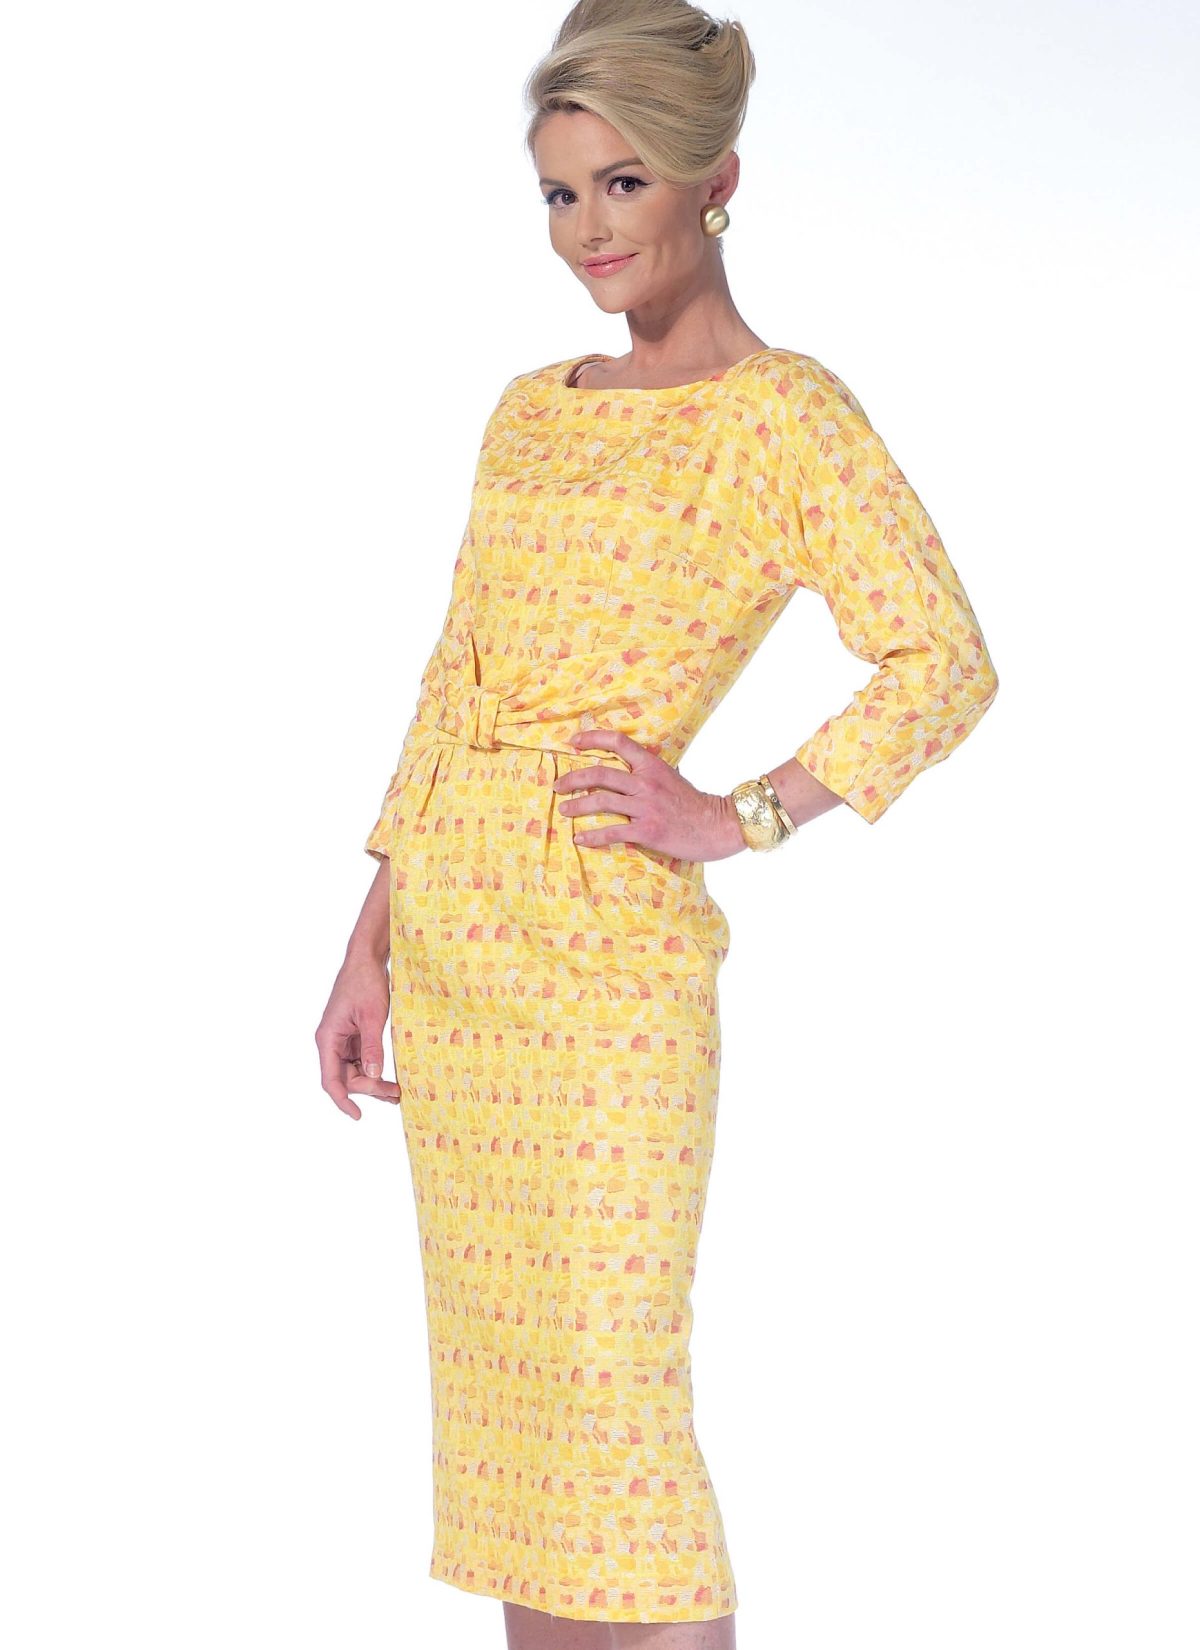 McCall's Sewing Pattern M7086 Misses'/Women's Dresses